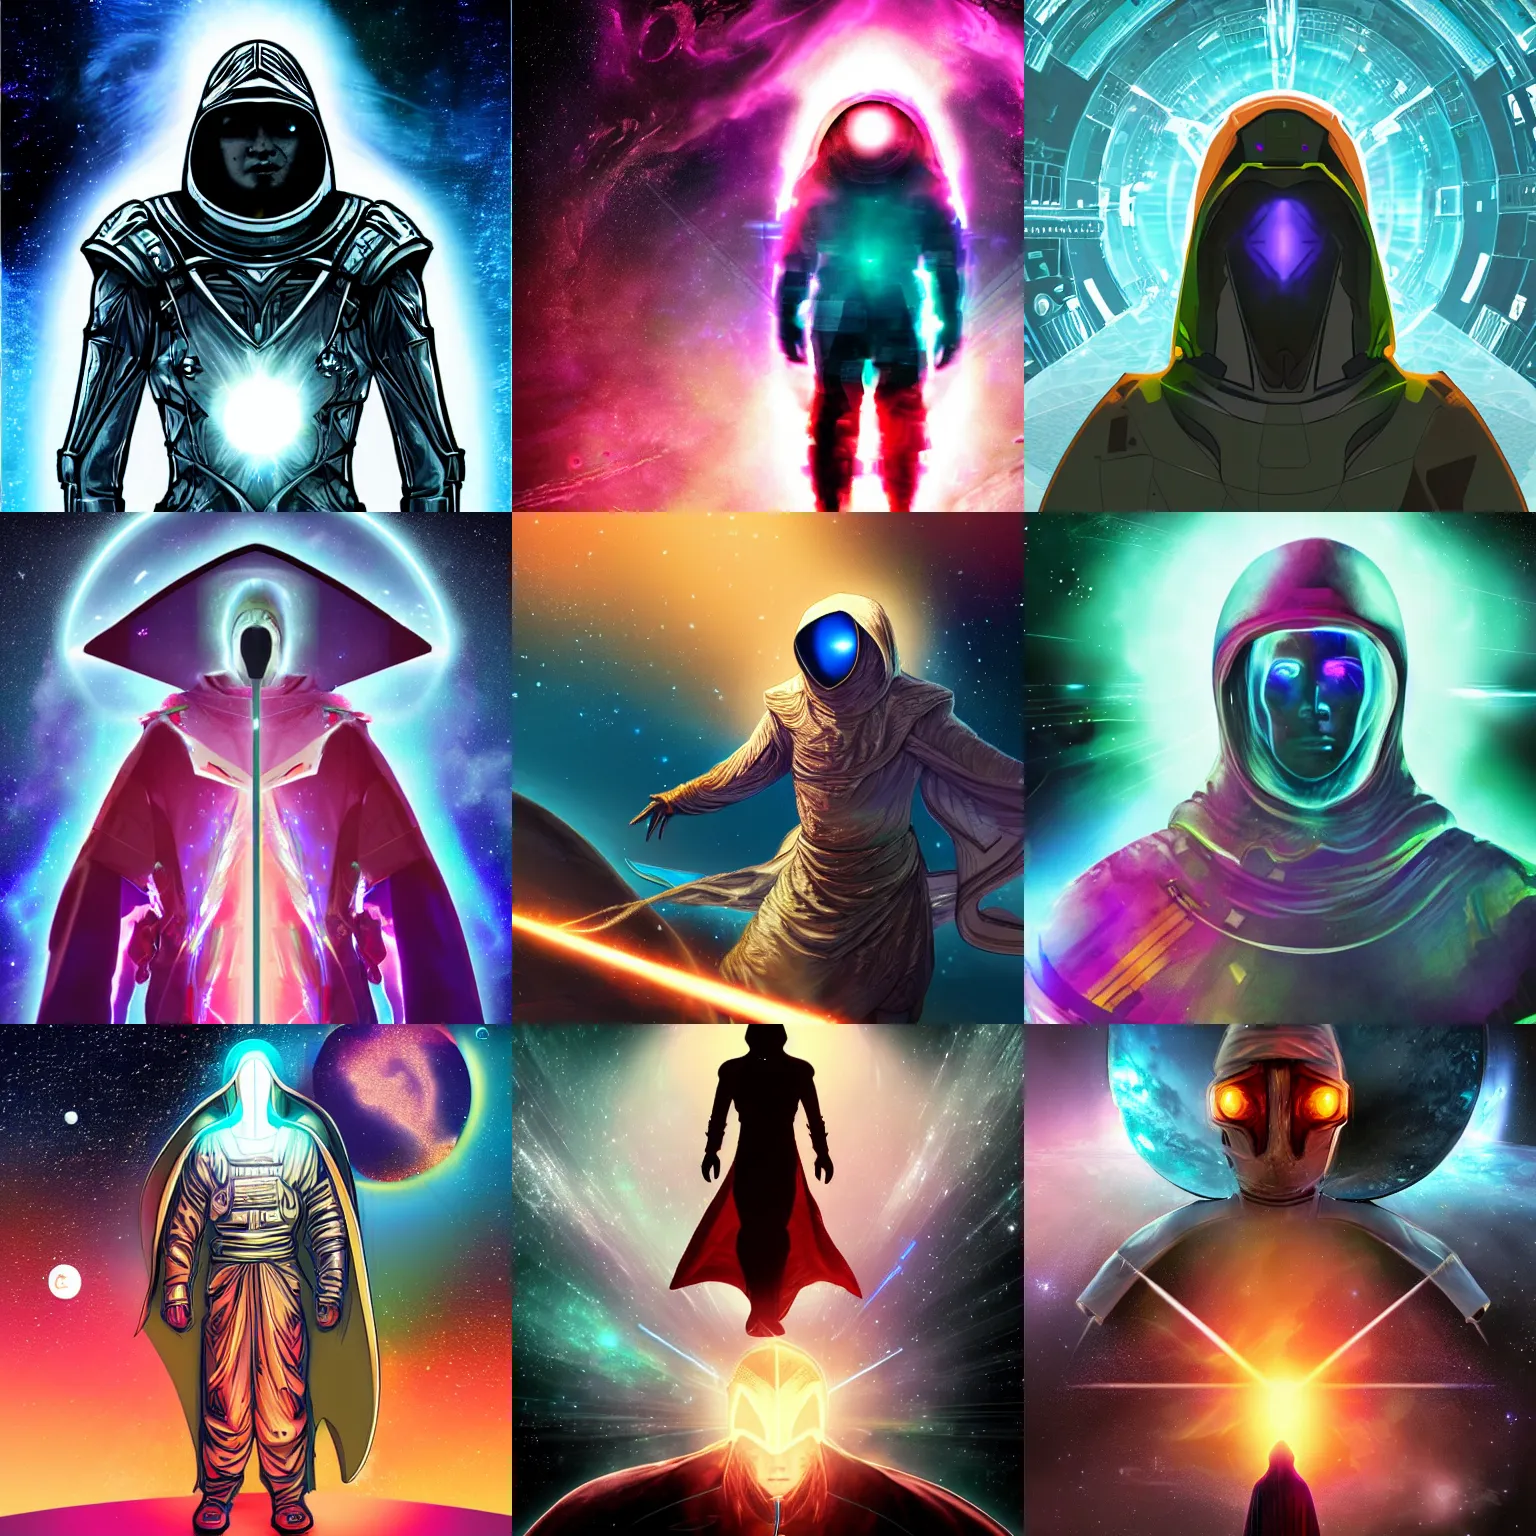 Prompt: Epic space scene featuring the warrior hooded entity of iridescent future technology